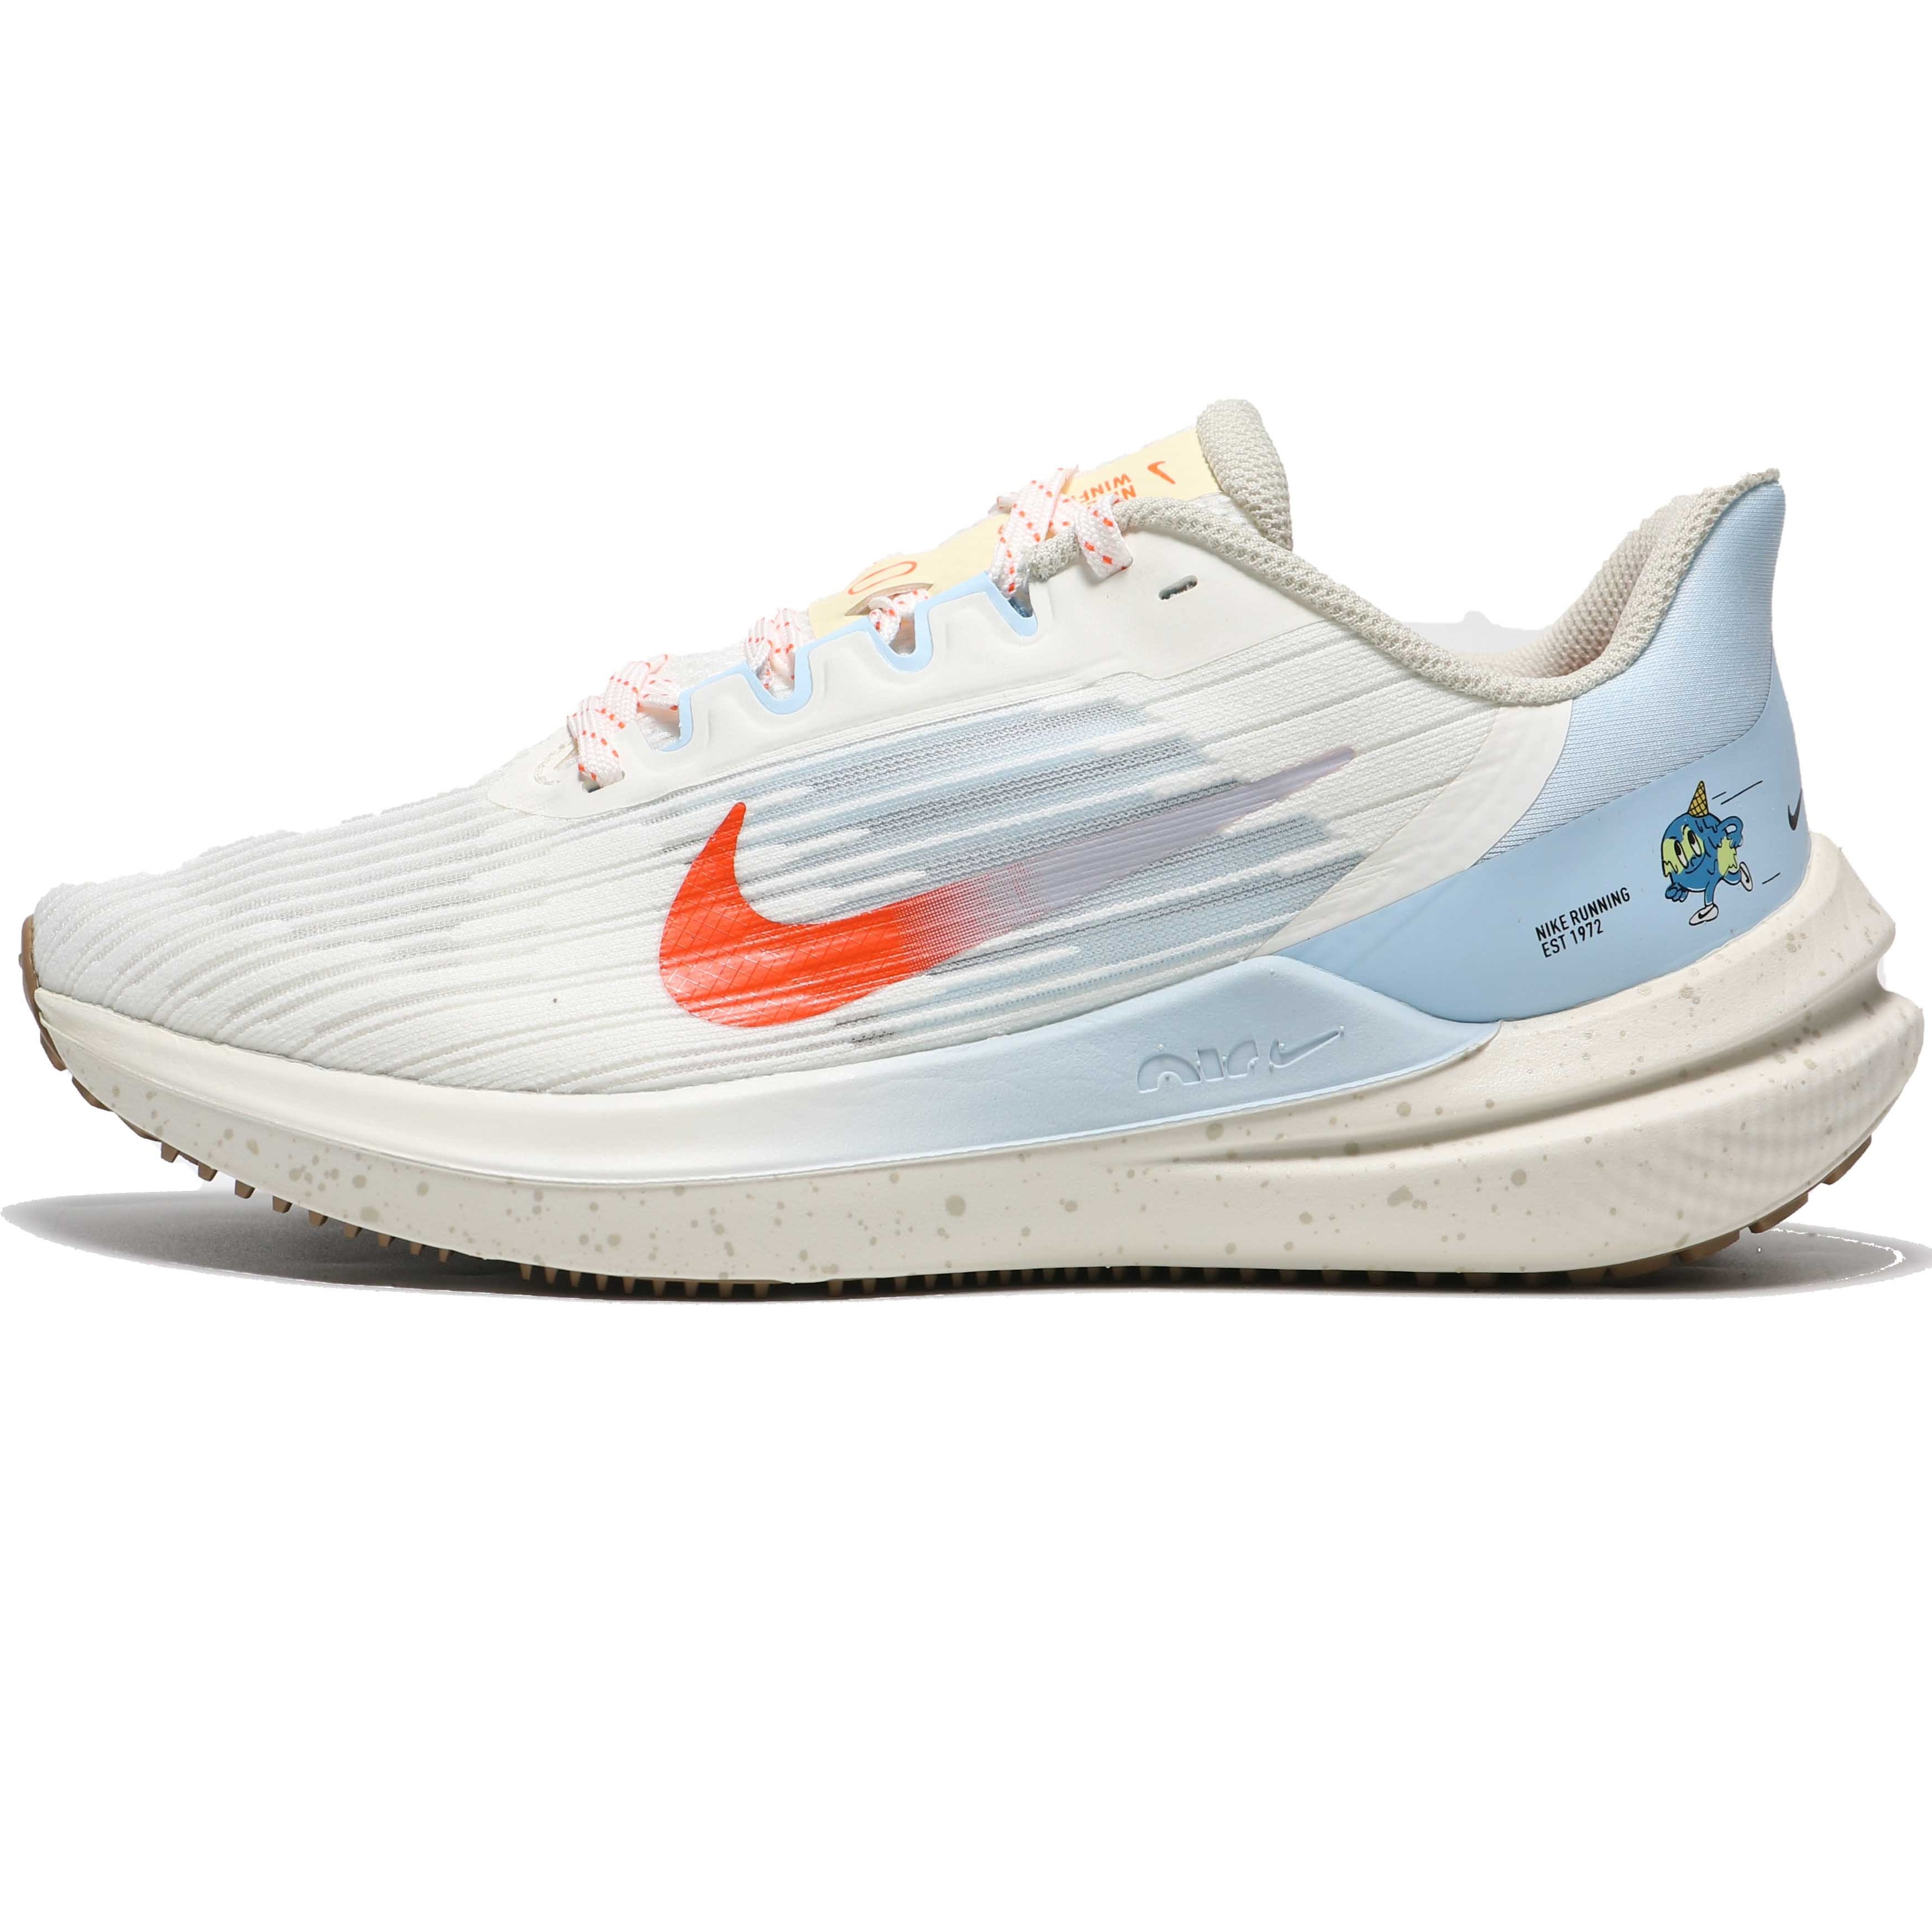 GIÀY THỂ THAO NIKE AIR WINFLO 9 LOW TOP WHITE SAIL MARATHON ROAD RUNNING SHOES DX6048-181 9